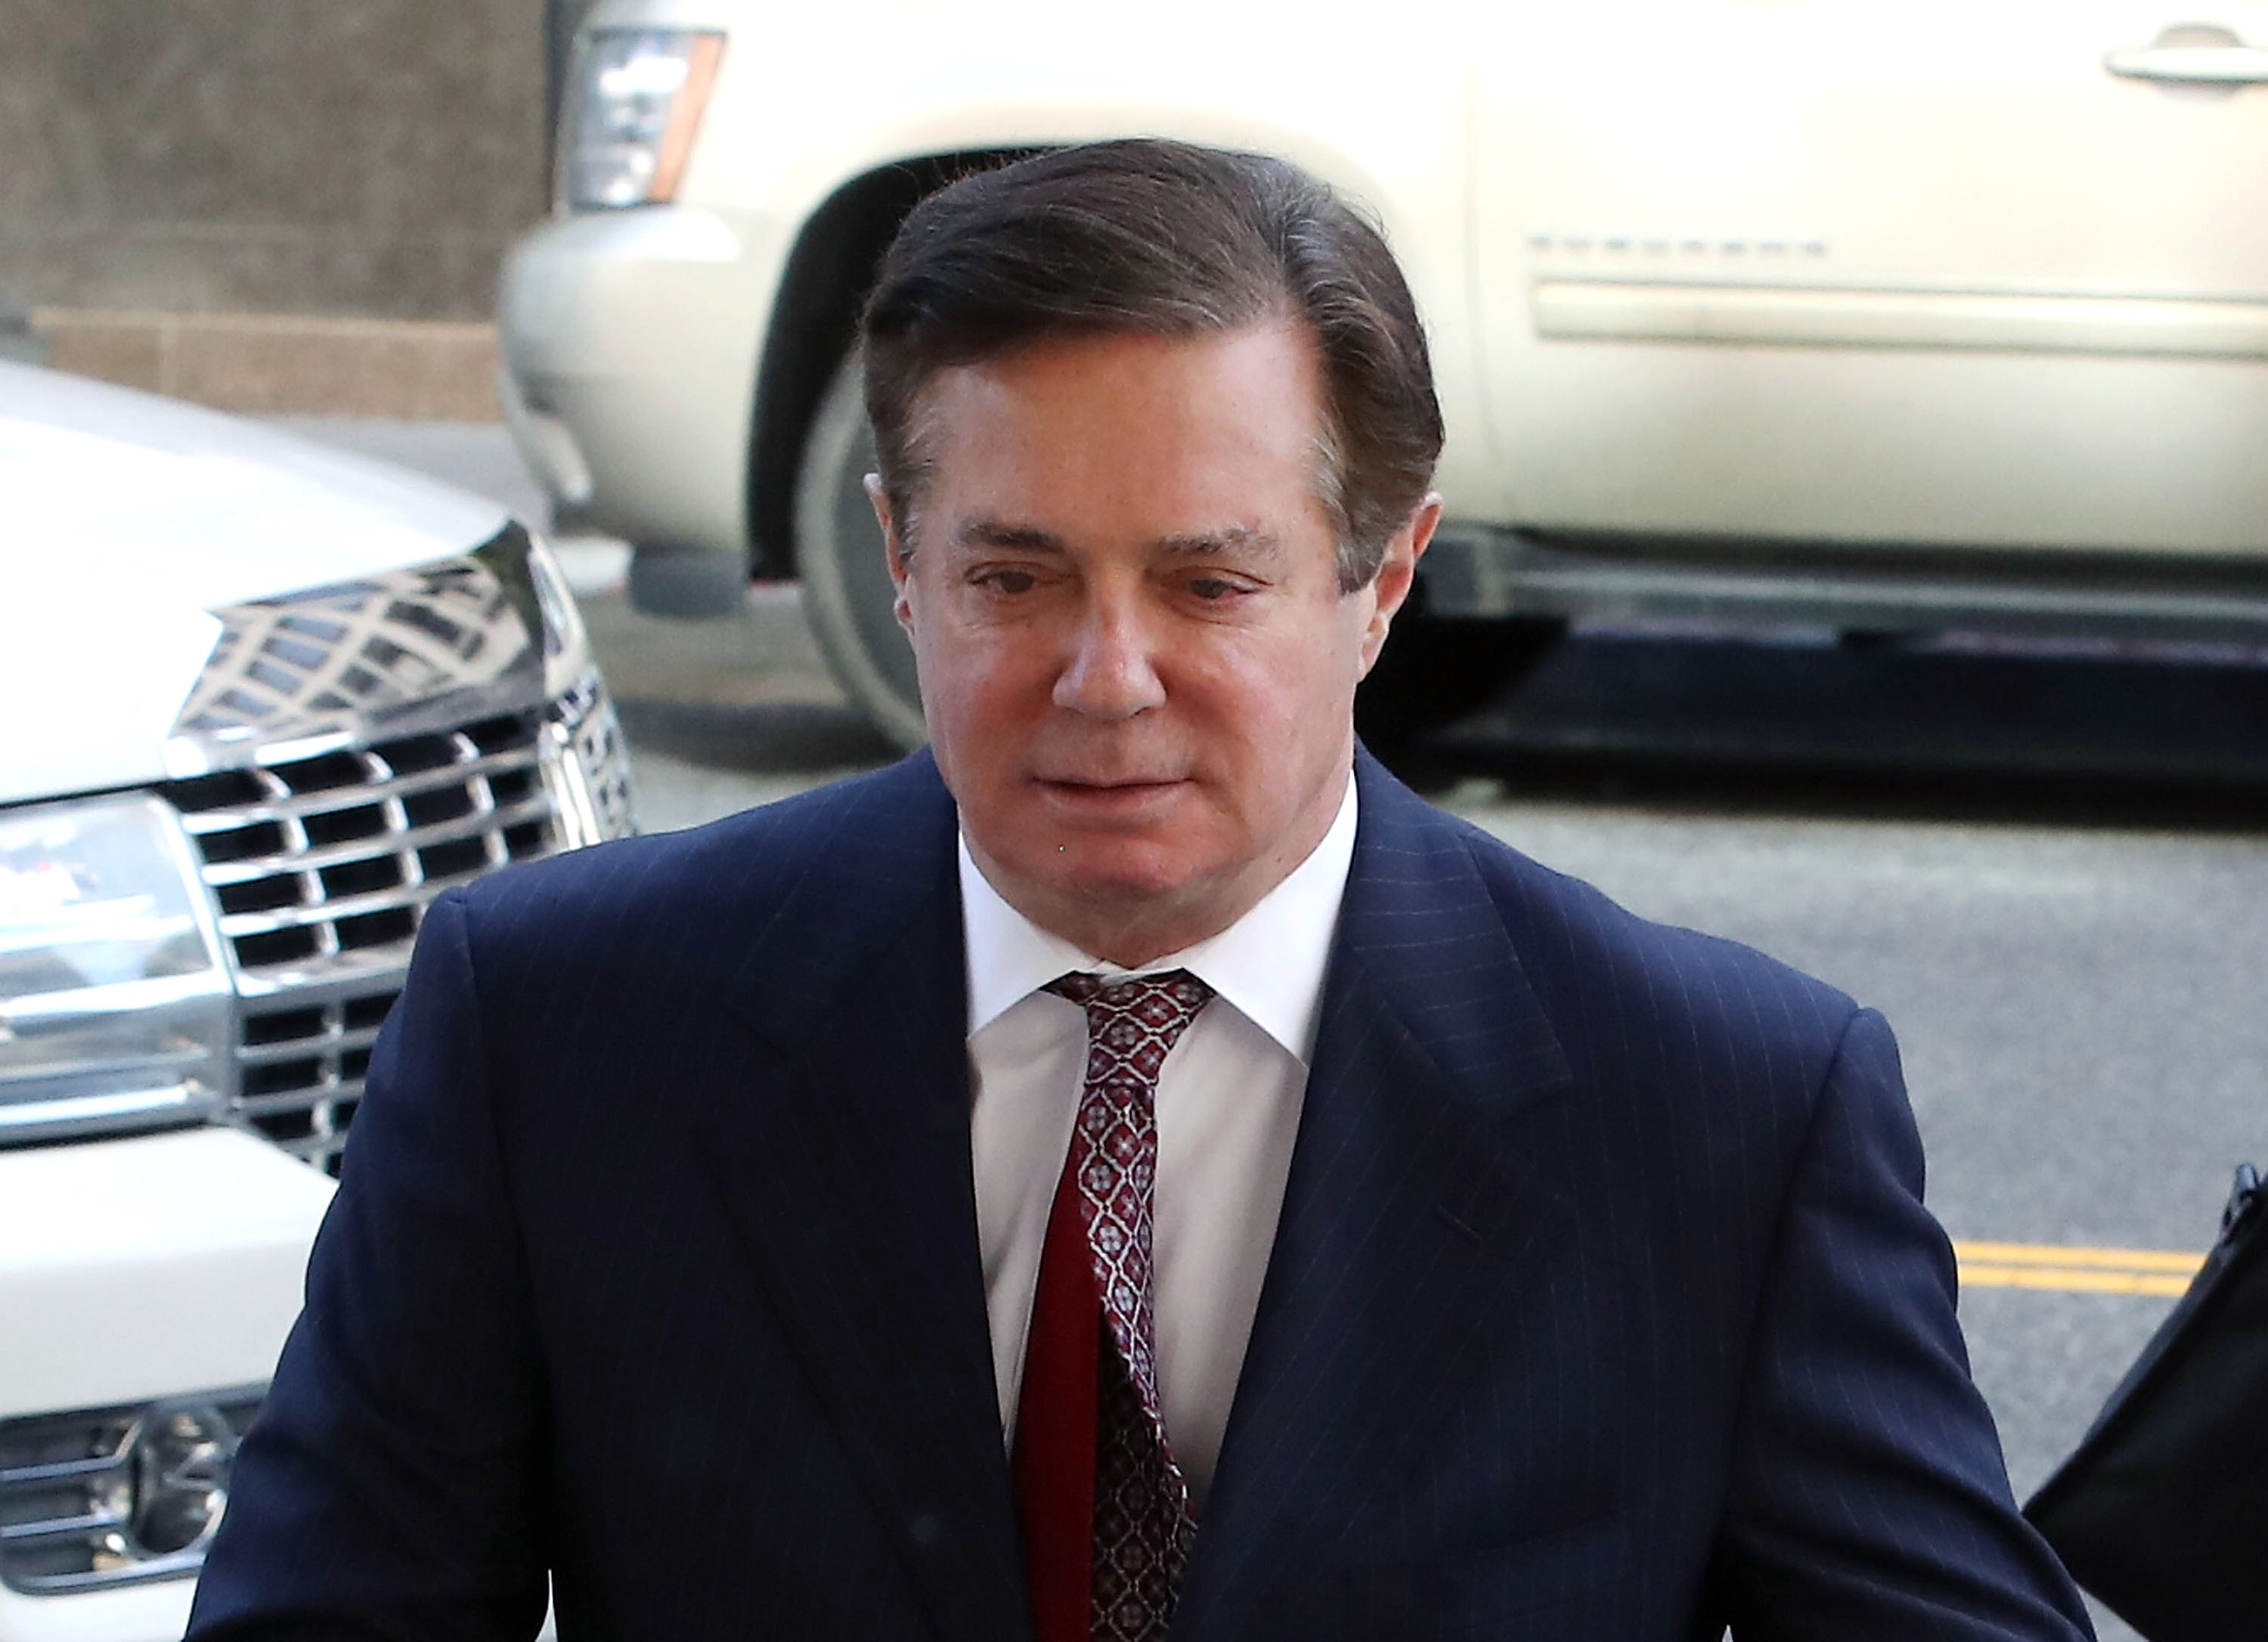 Former Trump campaign manager Paul Manafort arrives at the E. Barrett Prettyman U.S. Courthouse for a hearing on June 15, 2018 in Washington, DC. Photo by Mark Wilson/Getty Images